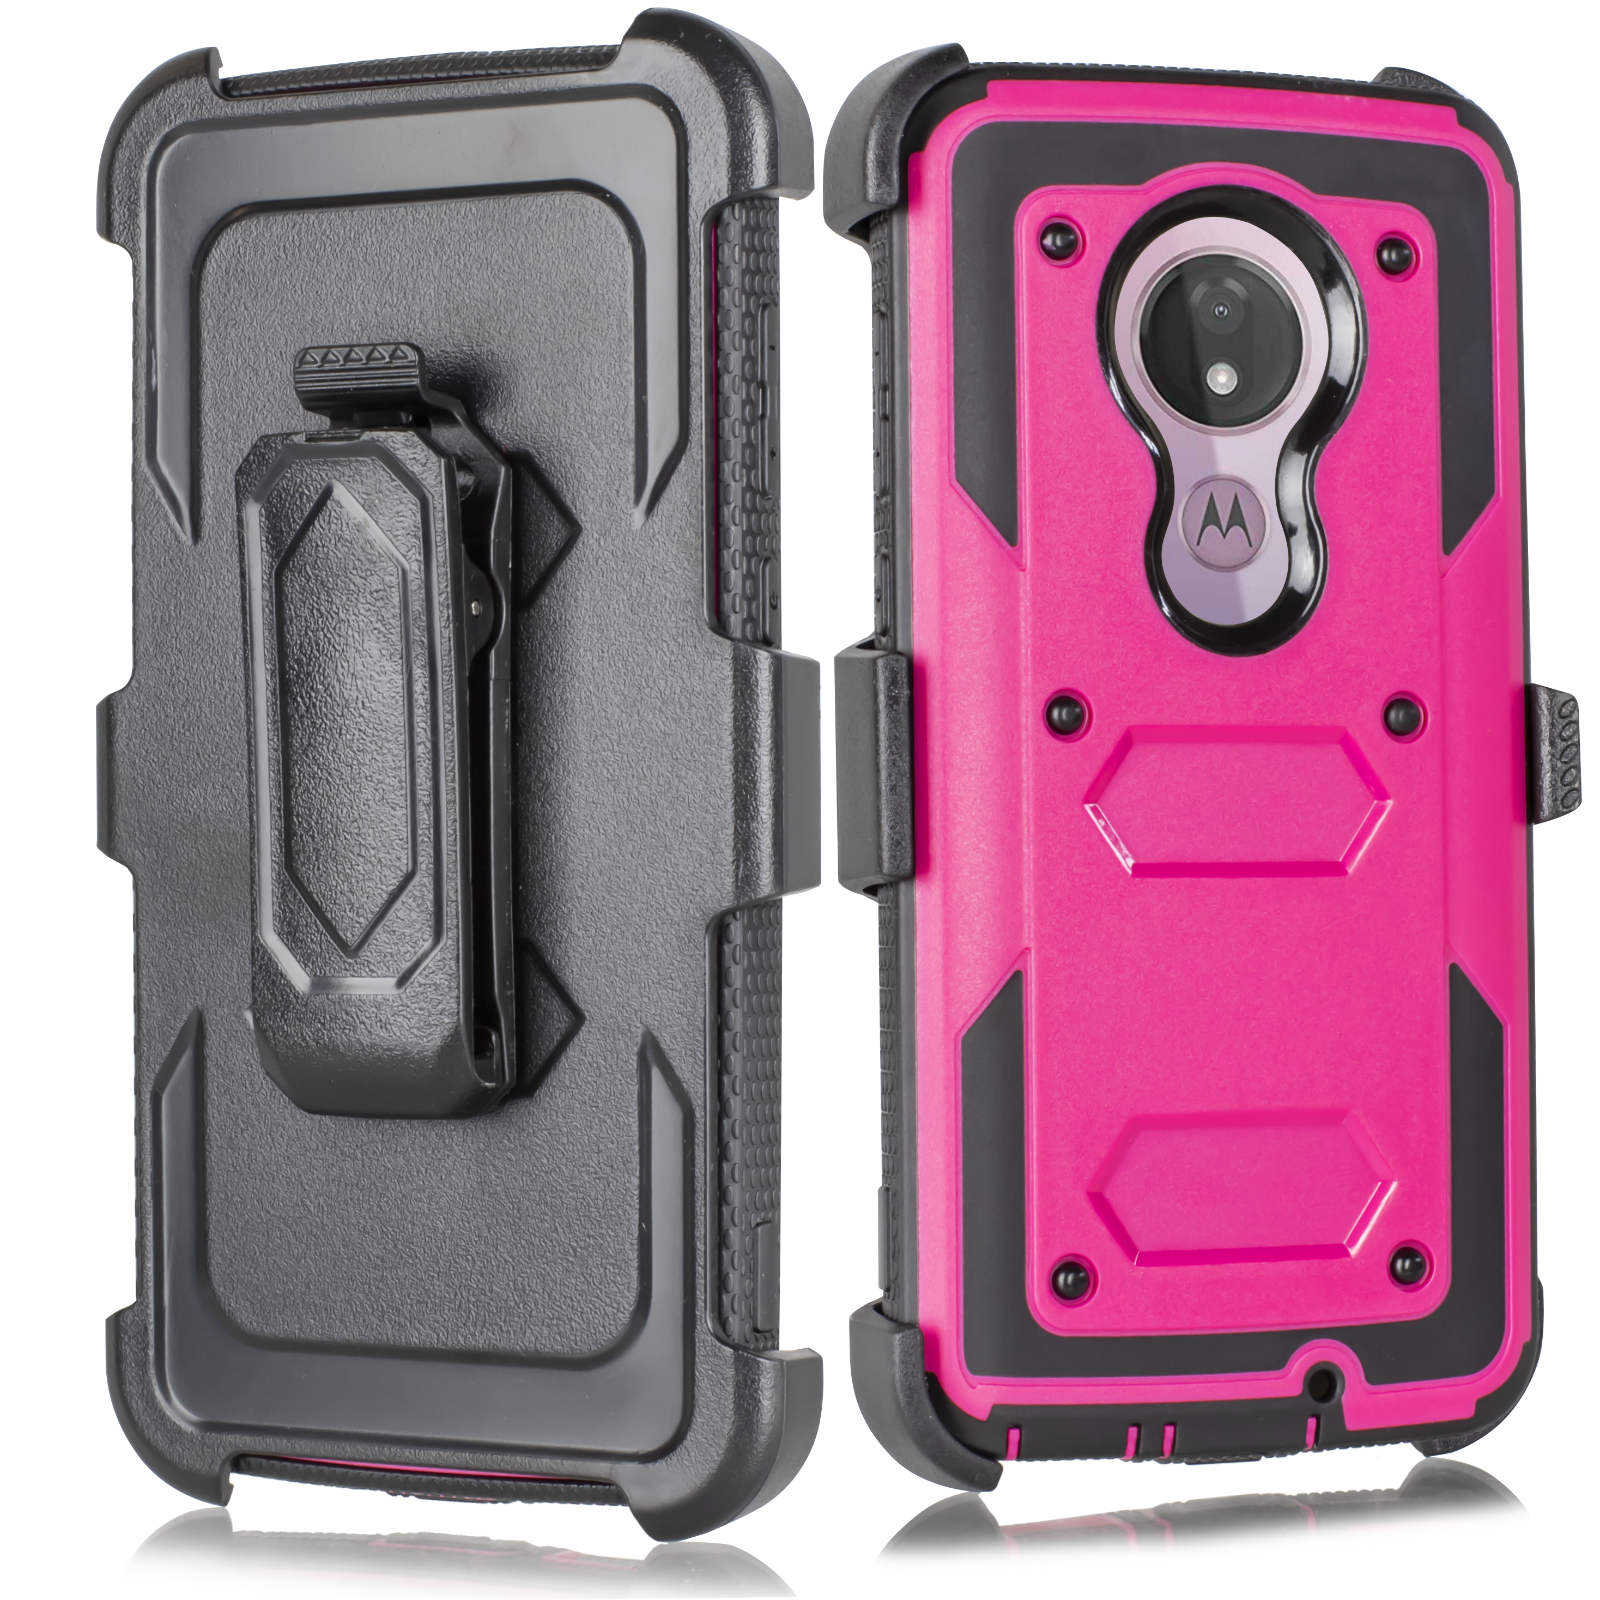 Value Pack ! for T-Mobile Revvlry+ Plus Case, Shockproof Full Body Protective Case Cover with Kickstand and Belt Swivel Clip Compatible with Motorola Moto G7 / Moto G7 Plus case Phone Case 360° (Pink) - image 2 of 4